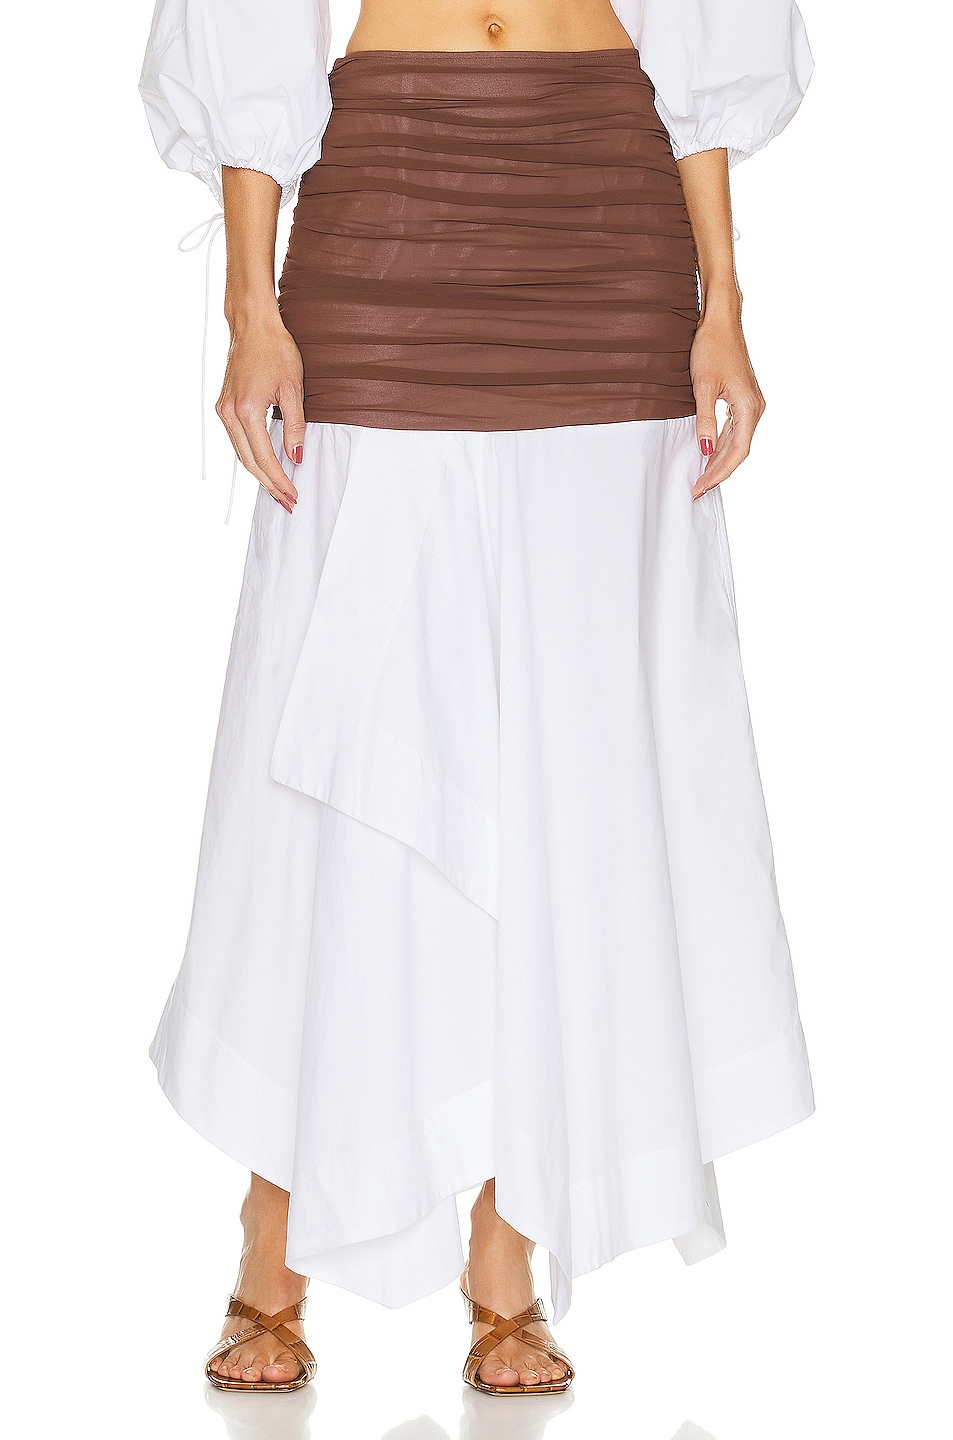 Image 1 of Helsa Cotton Poplin Skirt With Sheer Overlay in White & Brown